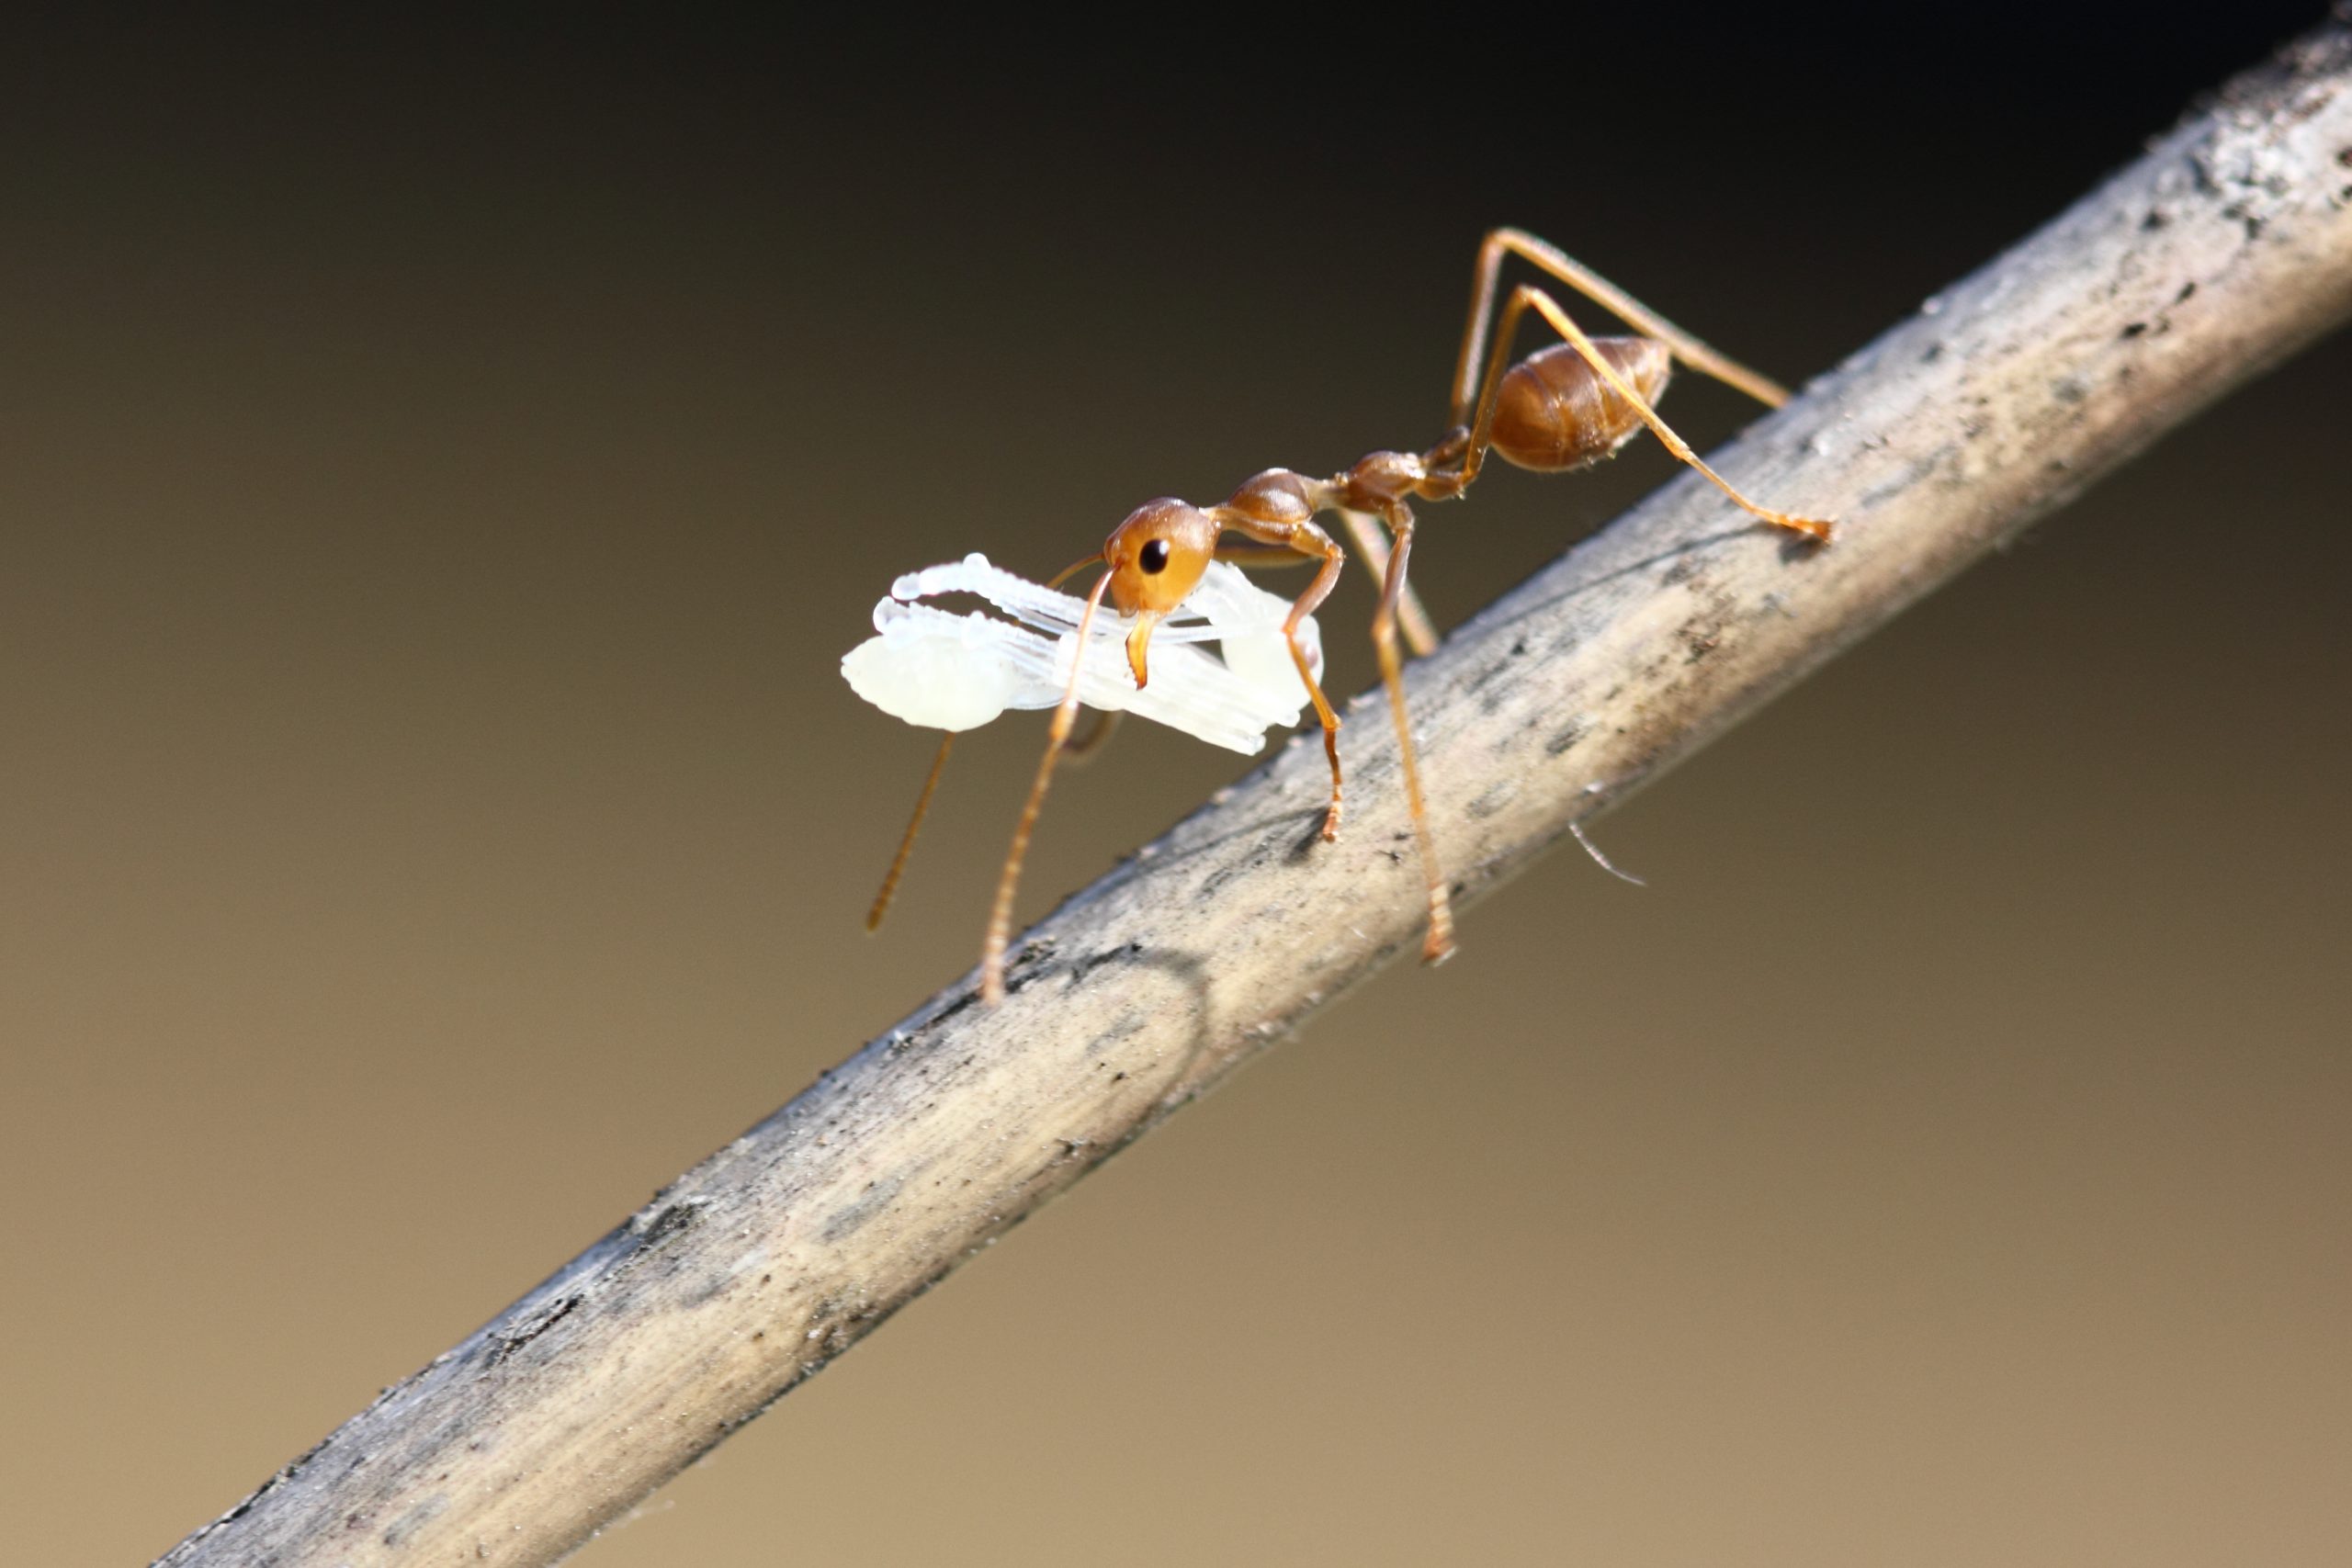 Weaver ant on a stick